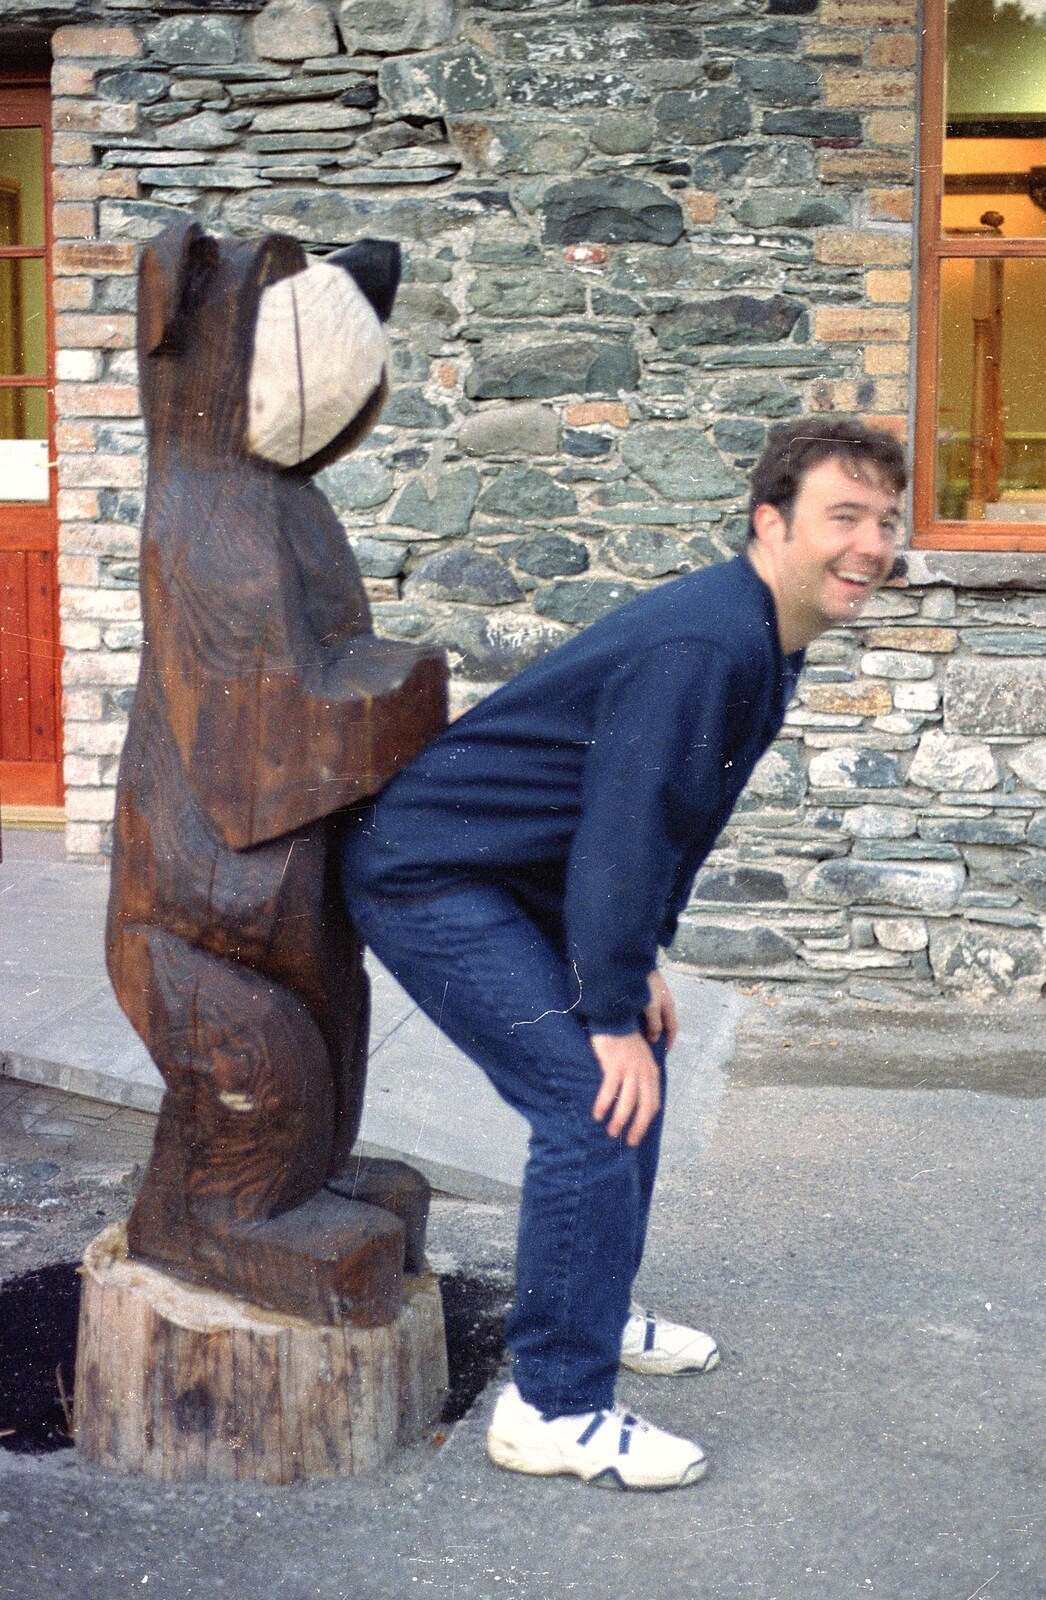 CISU Hang Around Keswick and The Briars, Cumbria - 16th September 1996: Tim pretends that he's getting one from a wooden bear